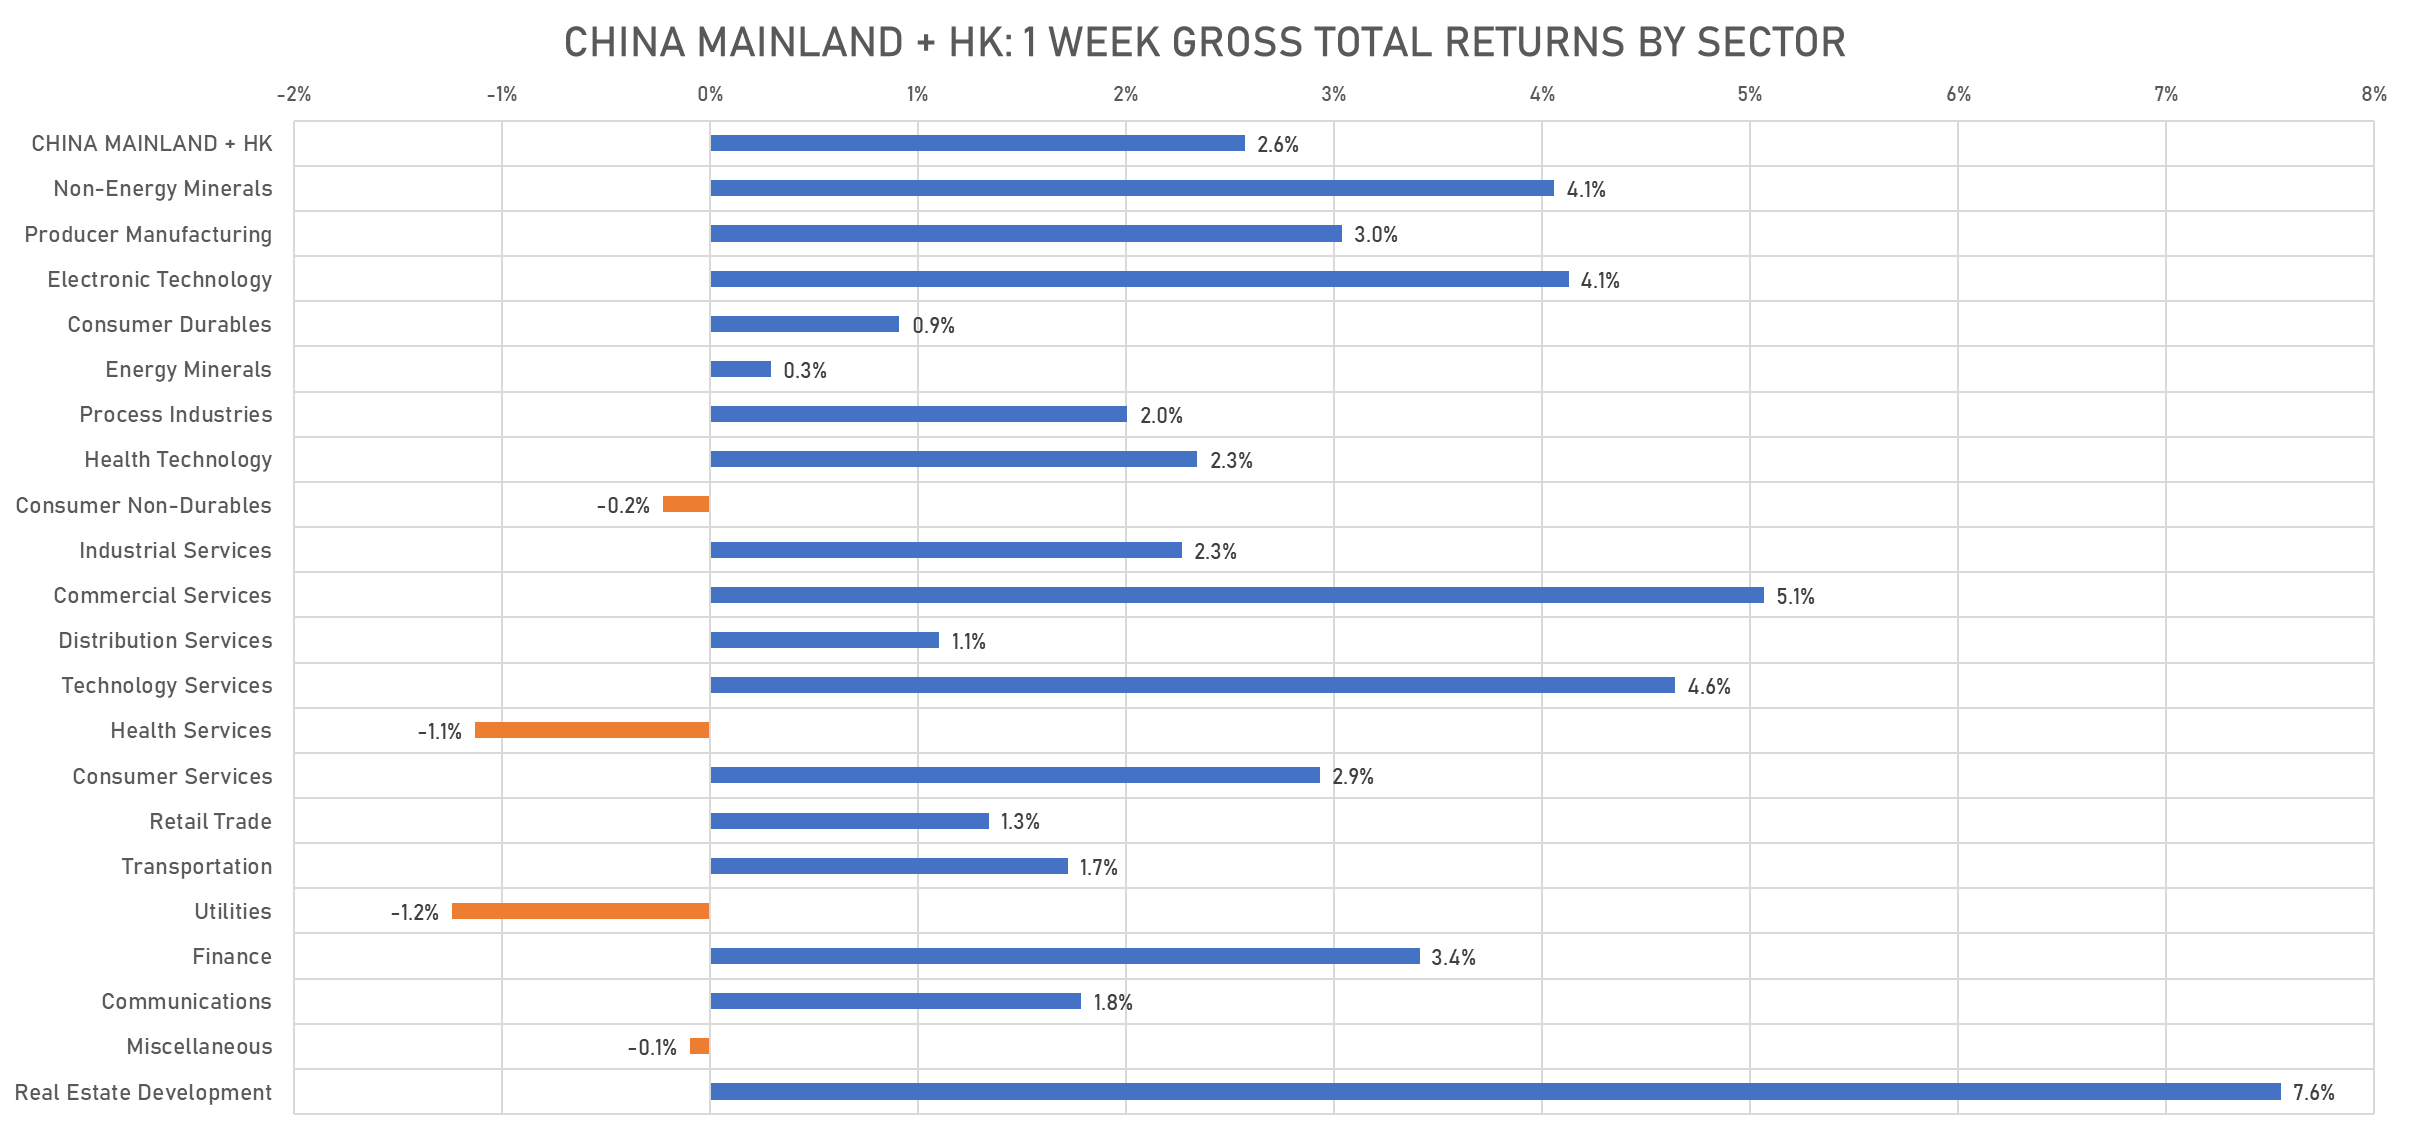 Weekly Returns Of Chinese Equities By Sector | Sources: phipost.com, FactSet data